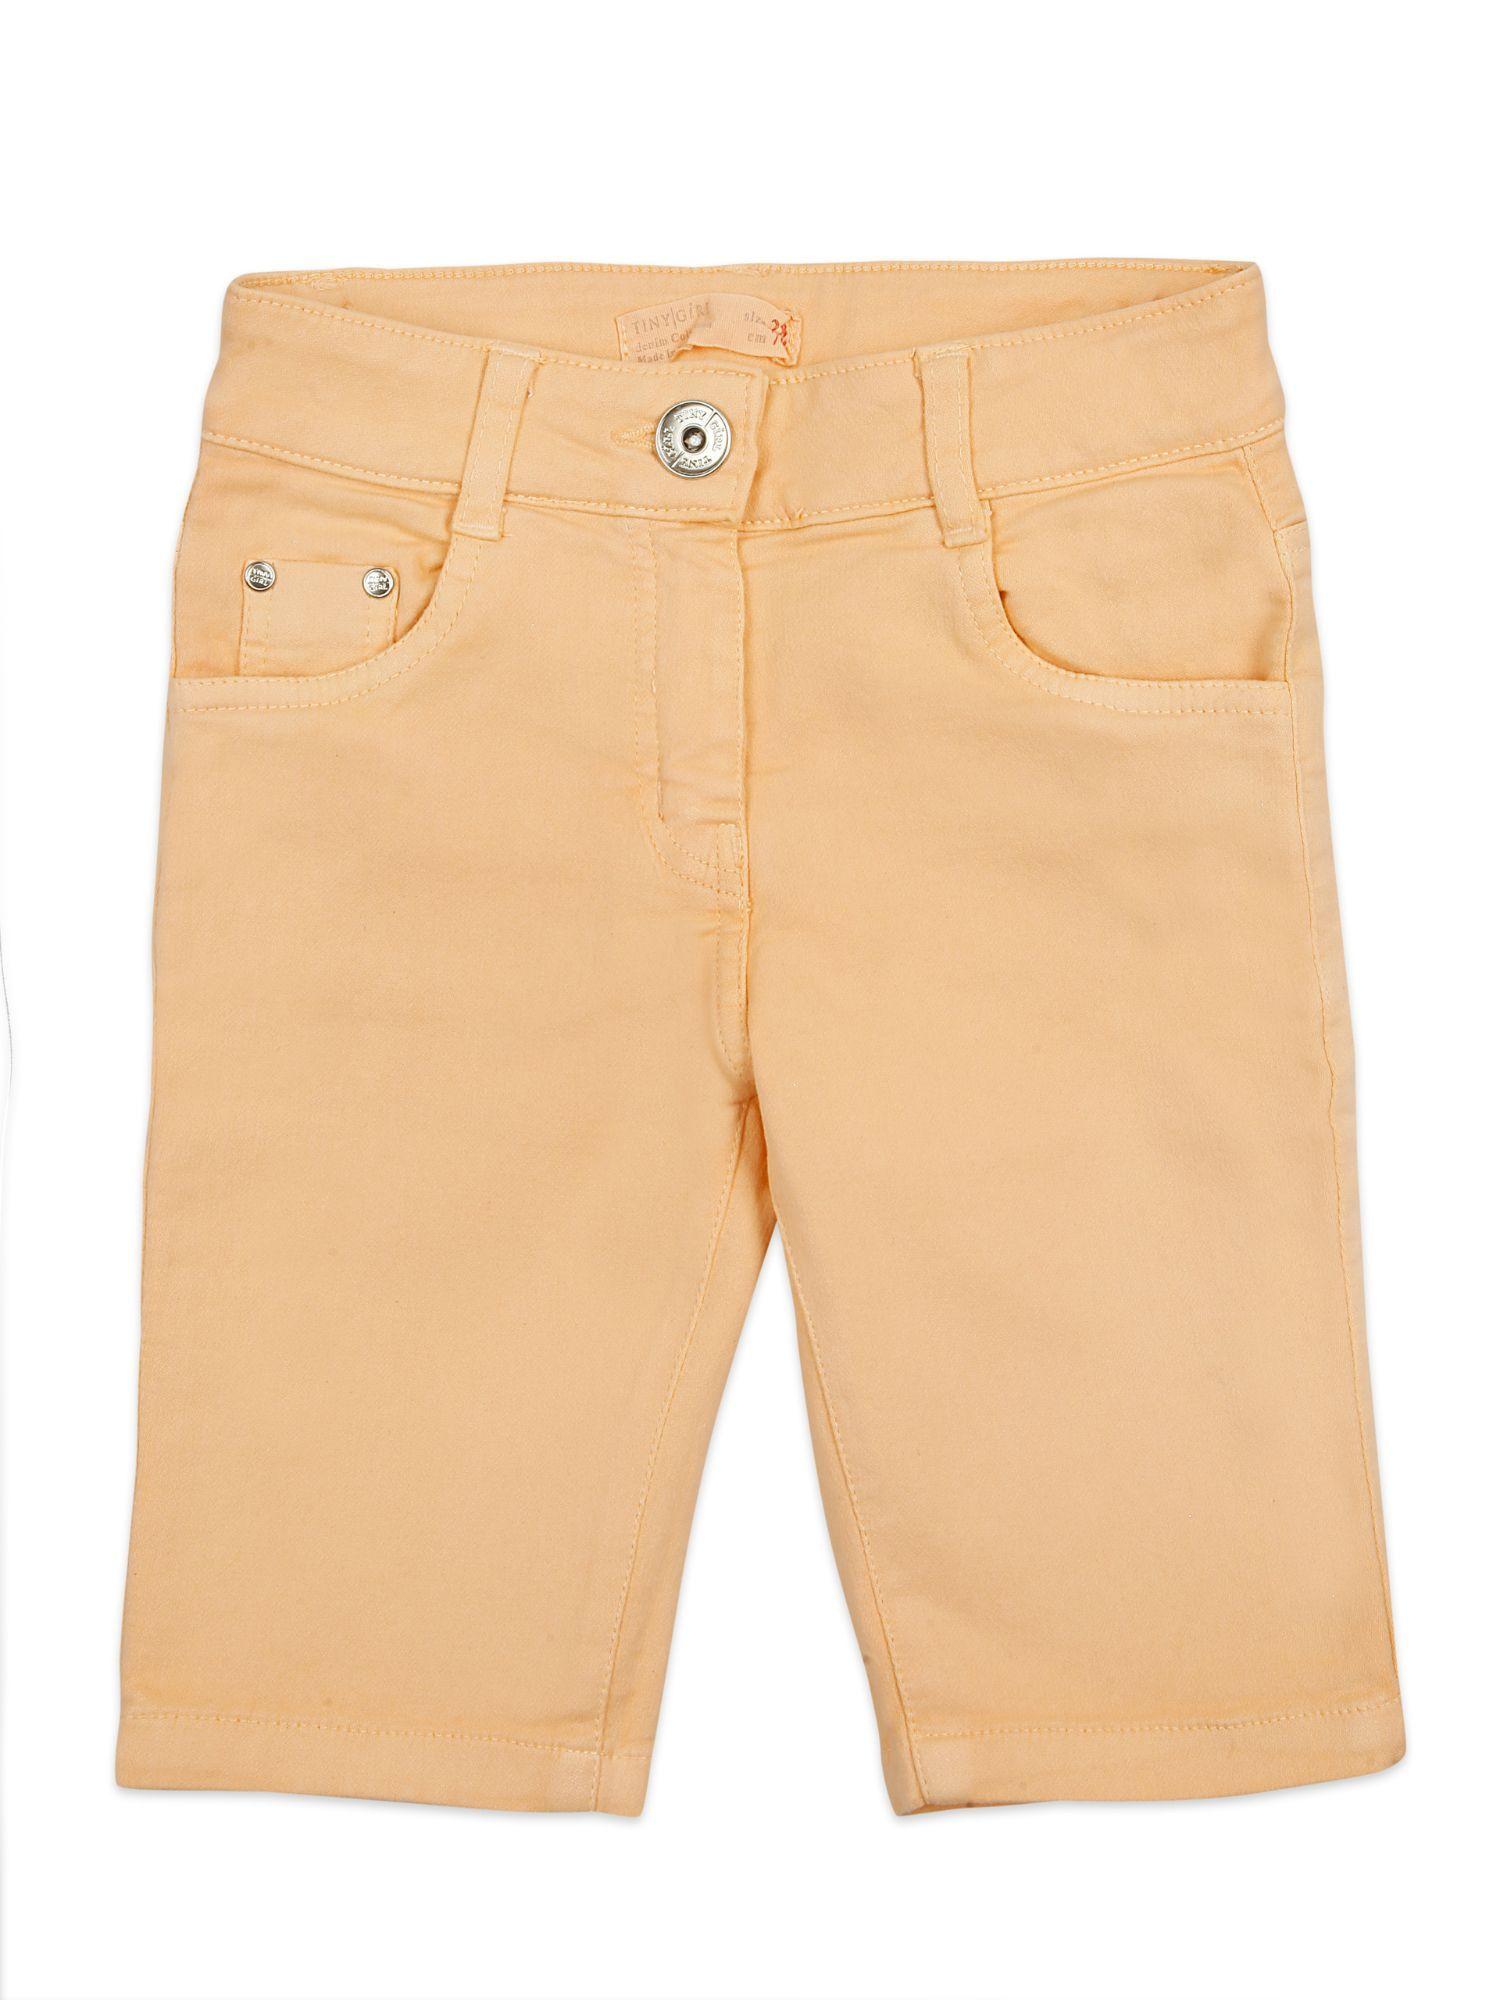 solid knee length shorts - peach